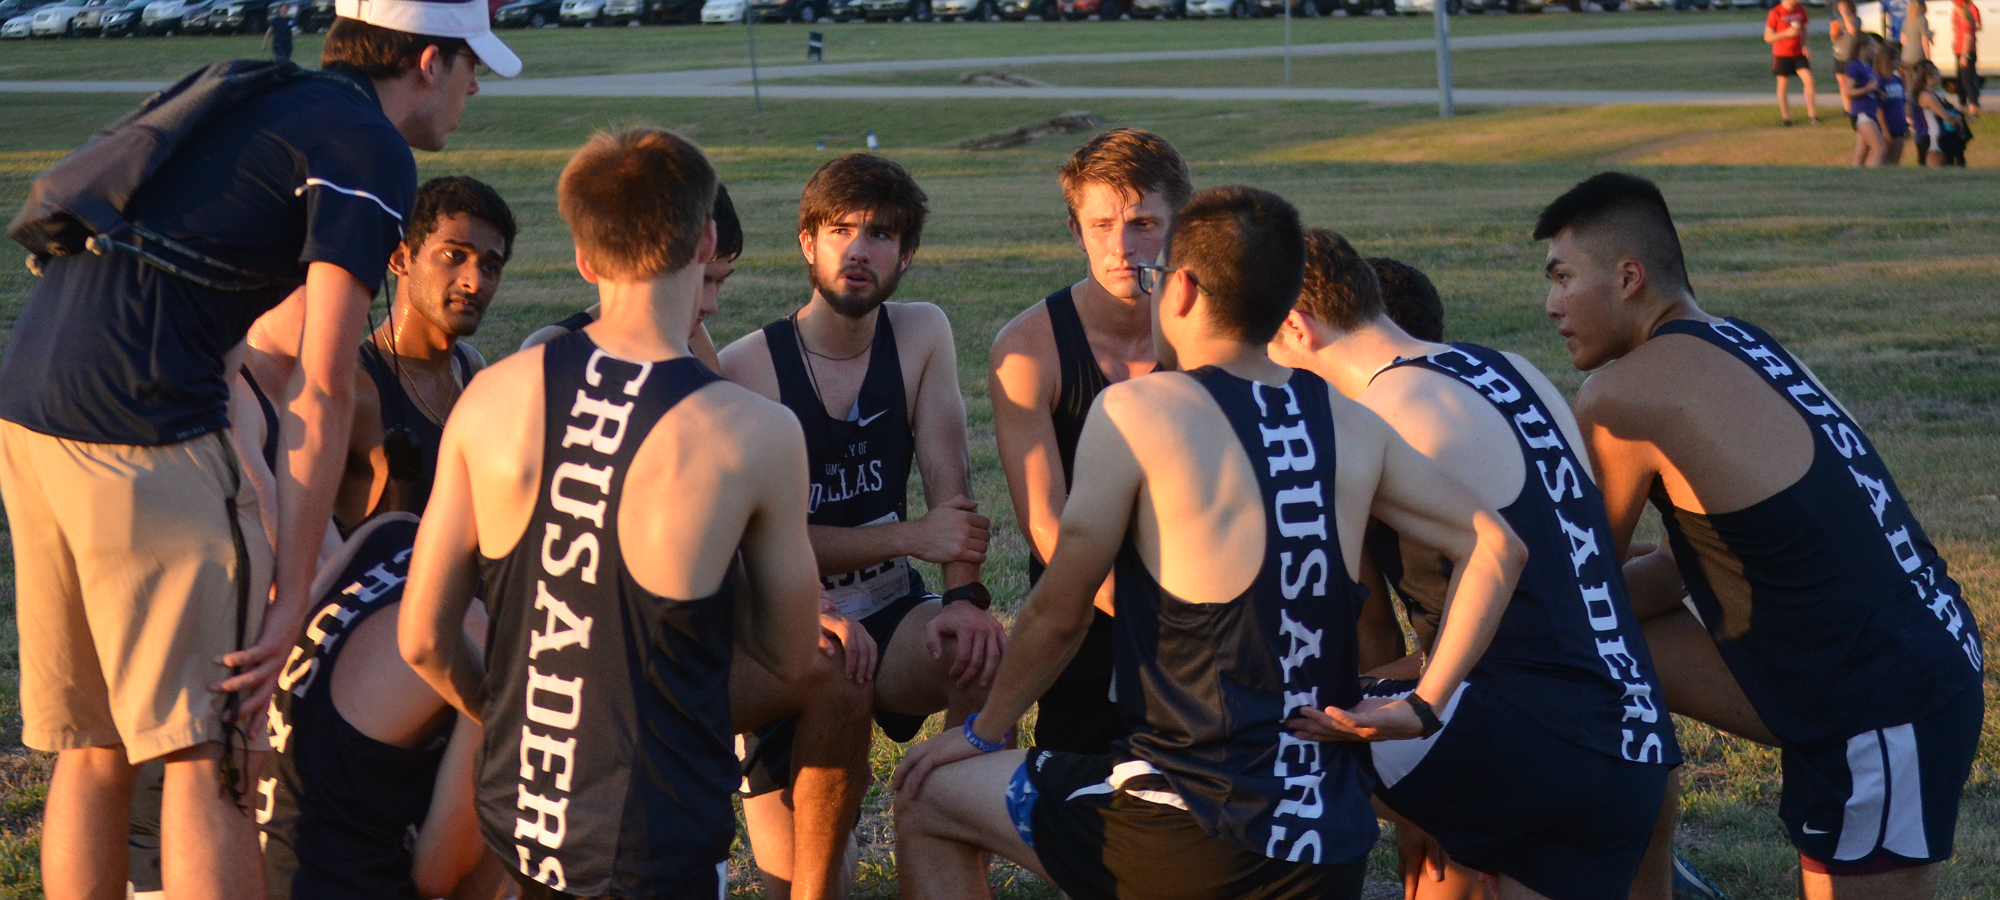 Men's Cross Country earns 2nd at Ozarks Cross Country Invitational